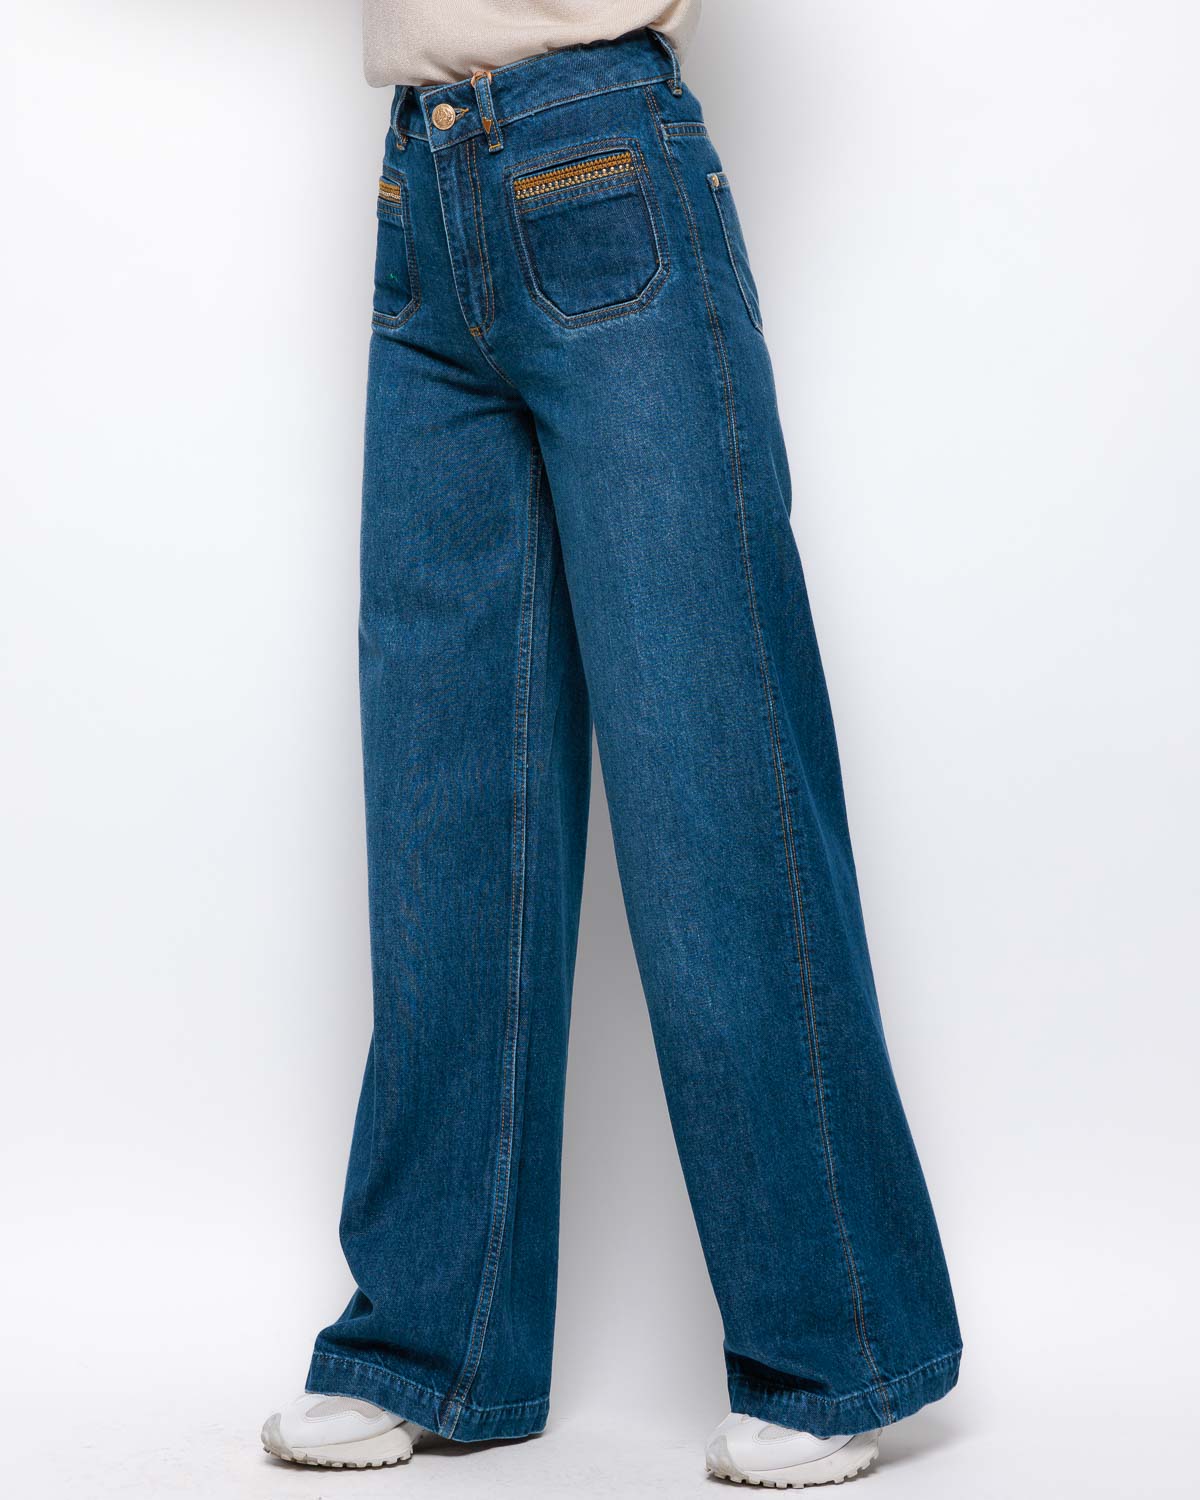 Mos Mosh Colette Sassy Jeans in Blue